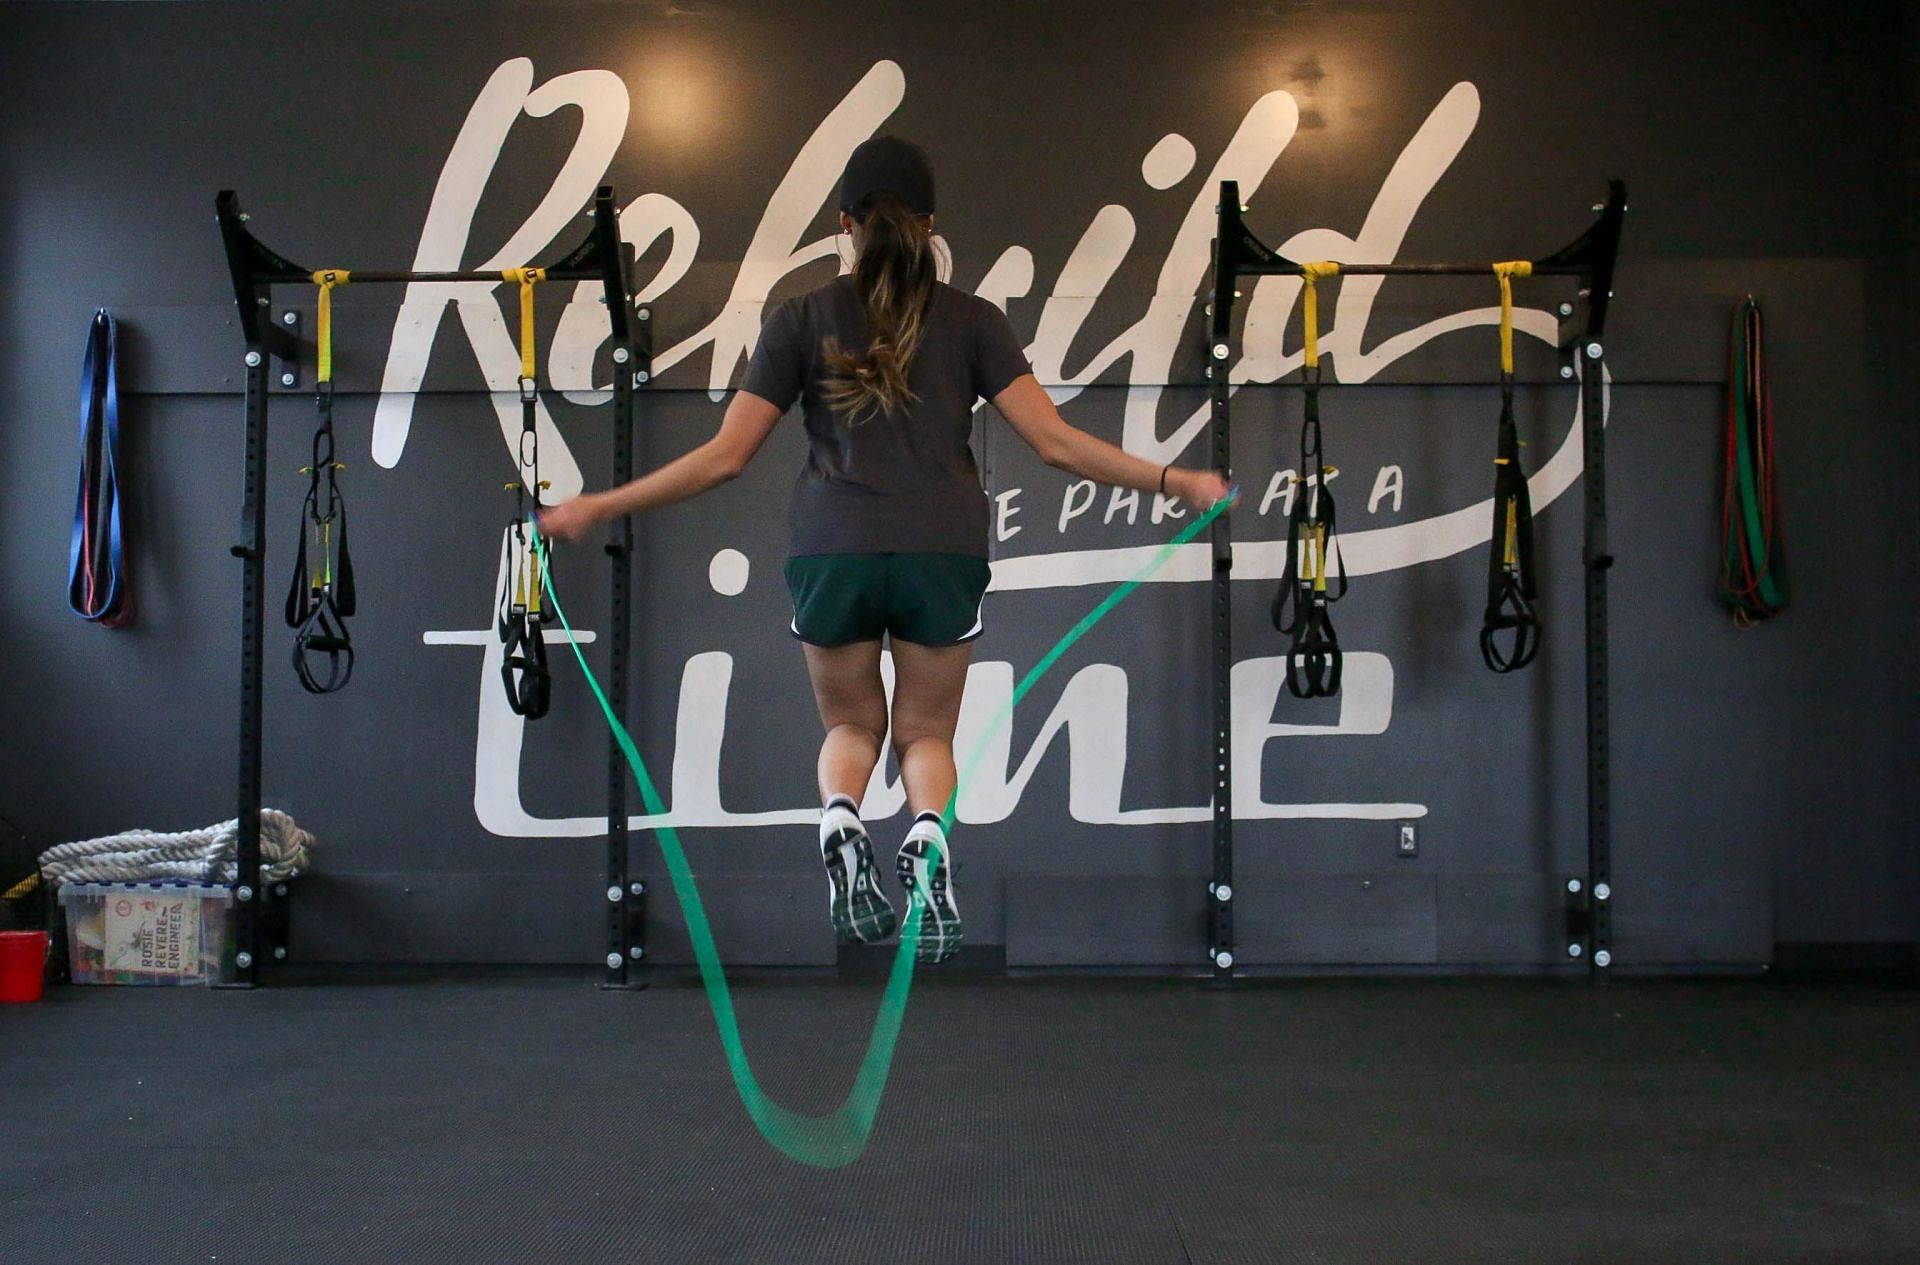 Jumping rope is a great way to lose belly fat! (Image via unsplash/Element5 Digital)